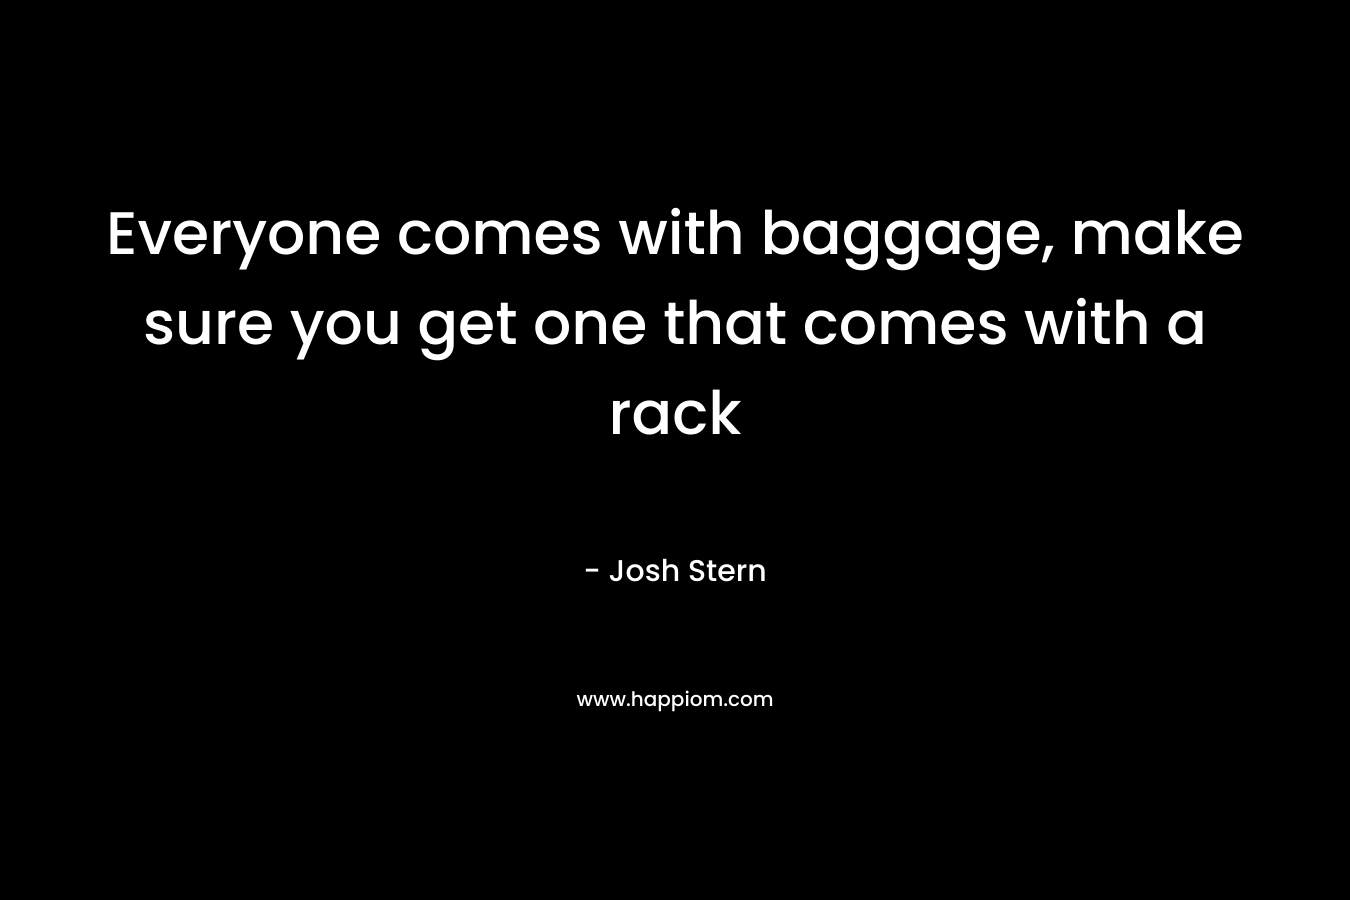 Everyone comes with baggage, make sure you get one that comes with a rack